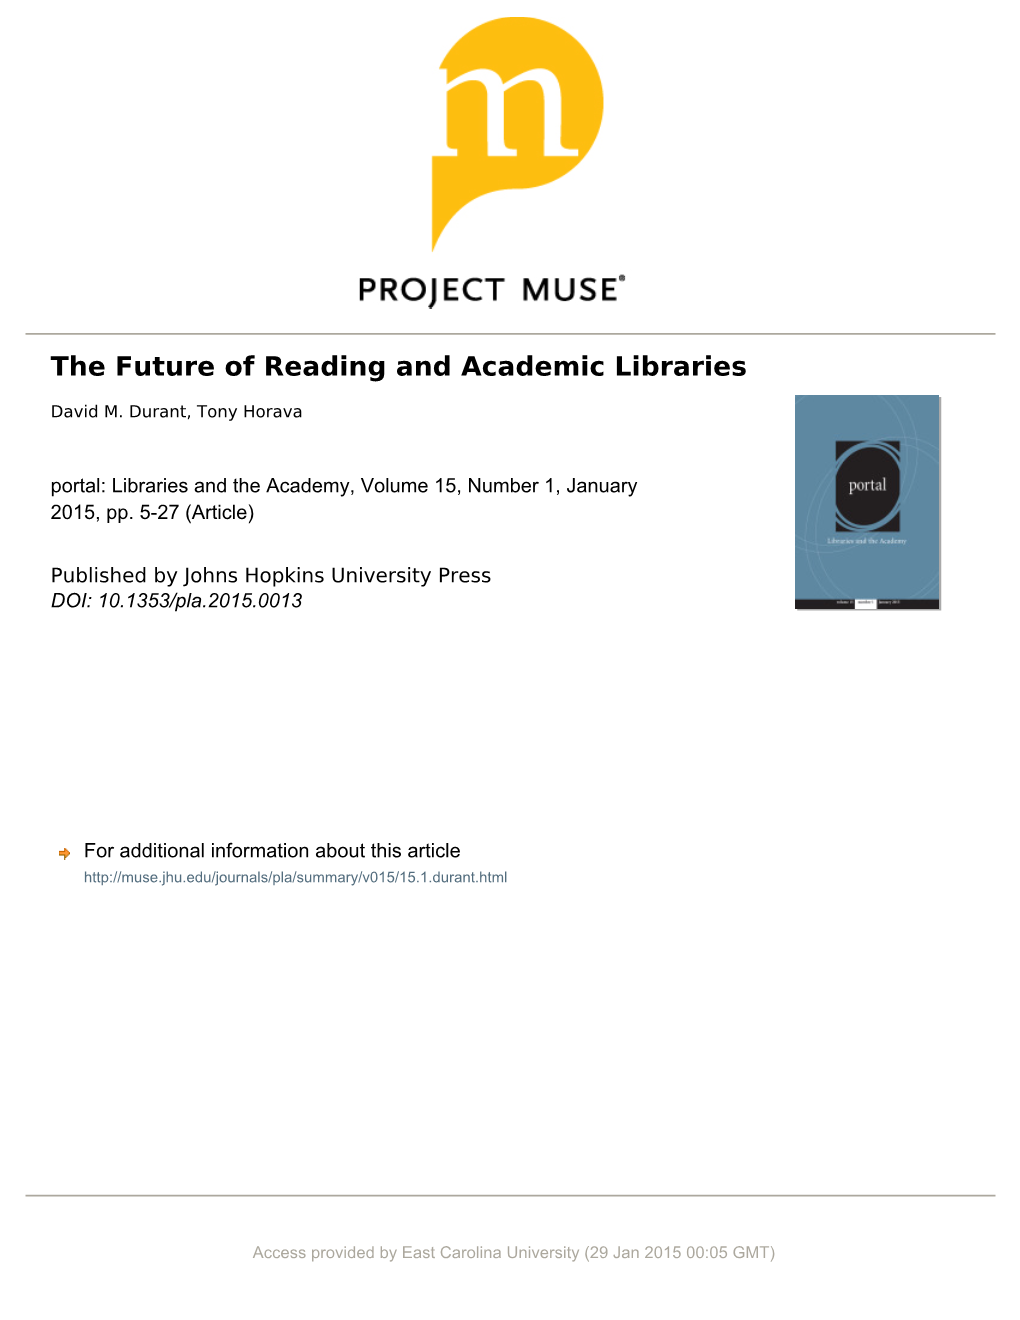 The Future of Reading and Academic Libraries